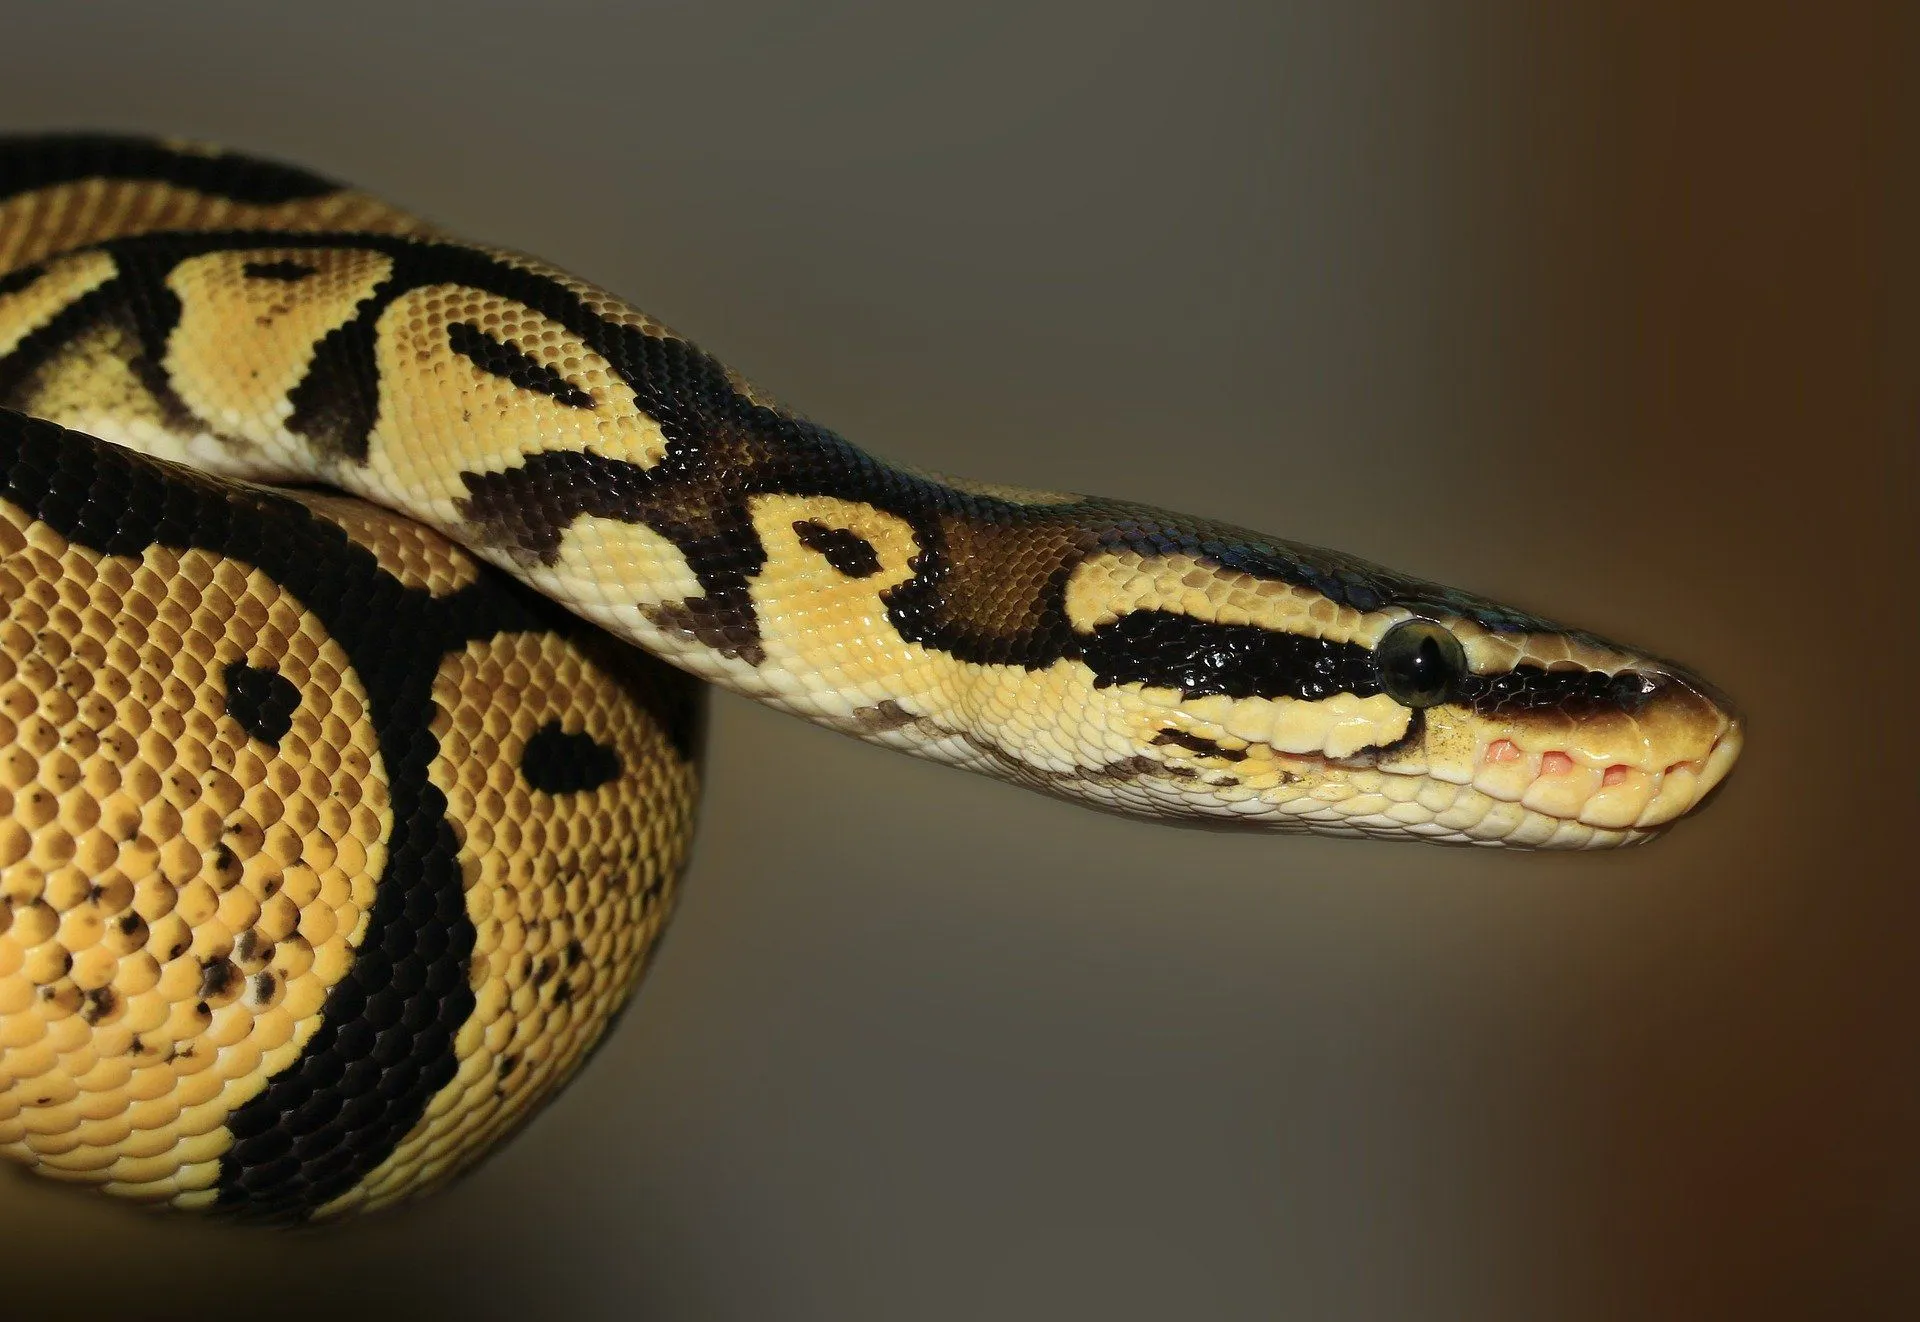 A snake is a limbless carnivorous reptile with scales on the body.